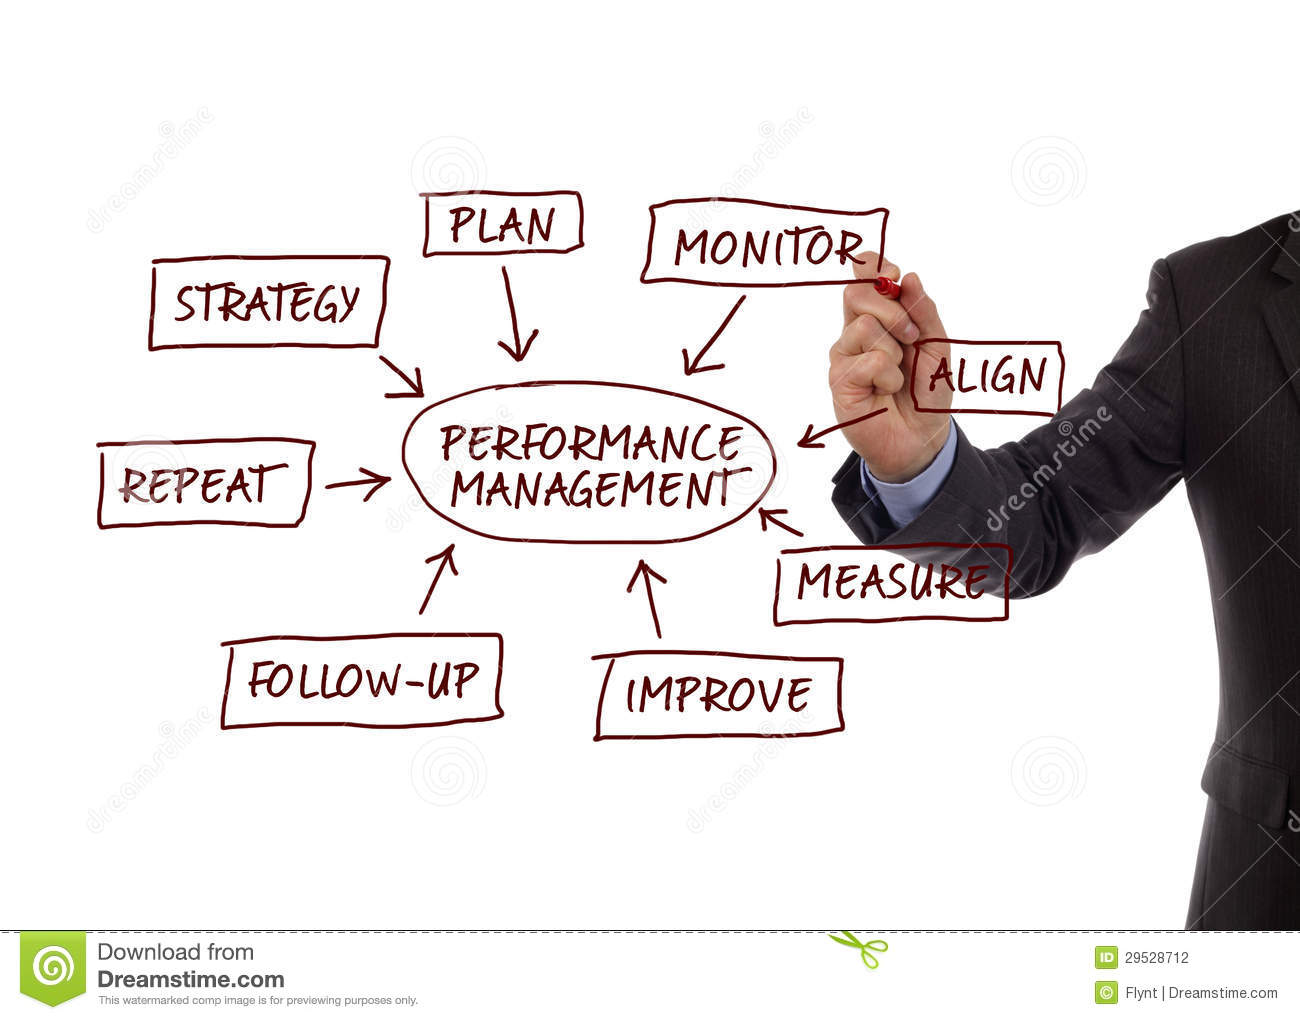 Performance Management Flow Chart Showing Key Business Terms Strategy